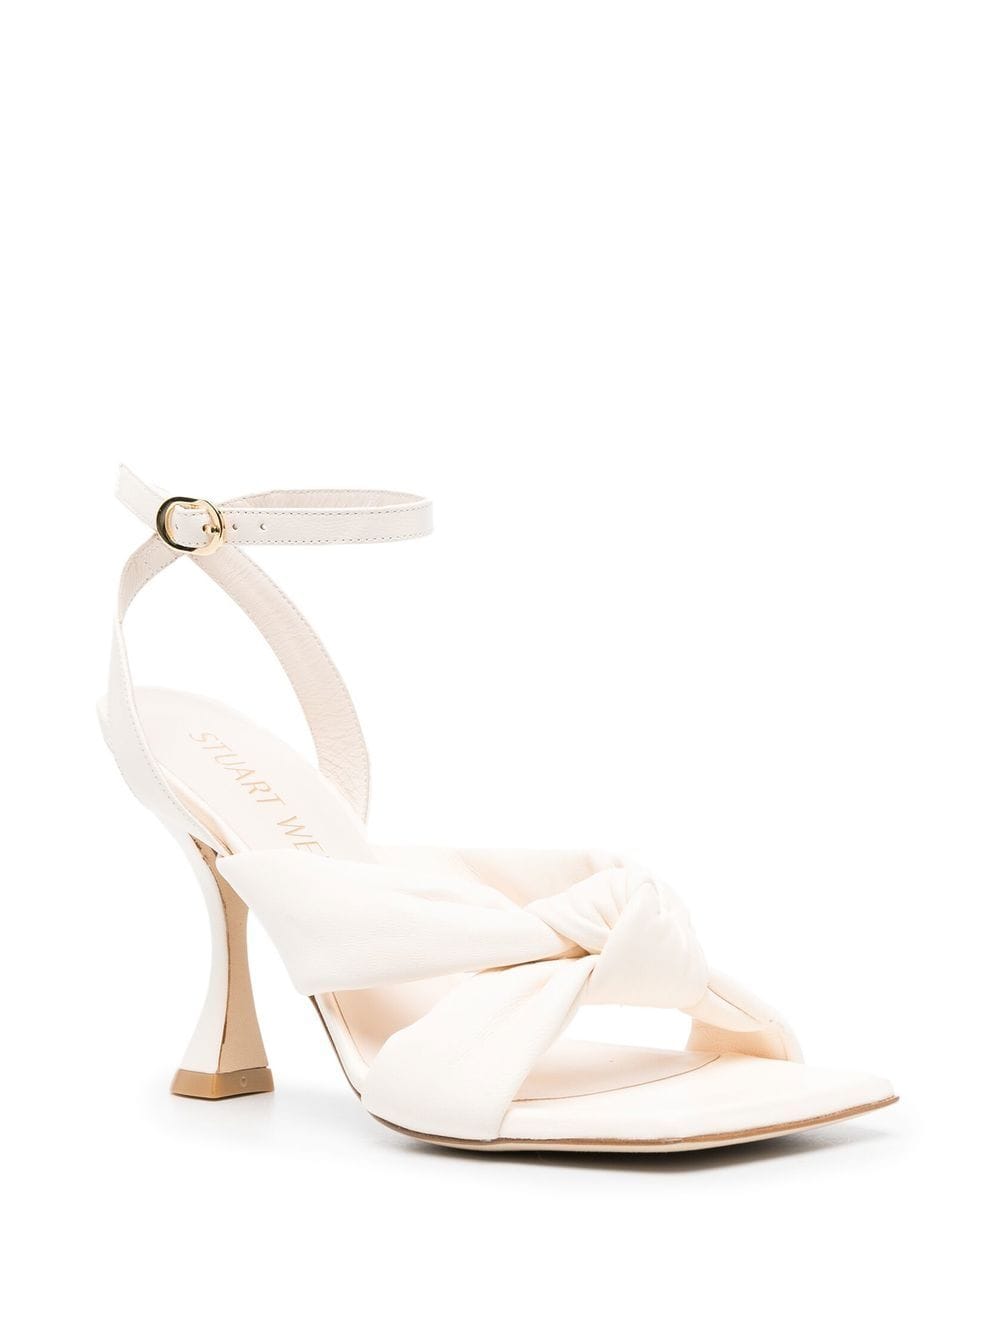 Shop Stuart Weitzman Playa 100mm Knotted Leather Sandals In Nude